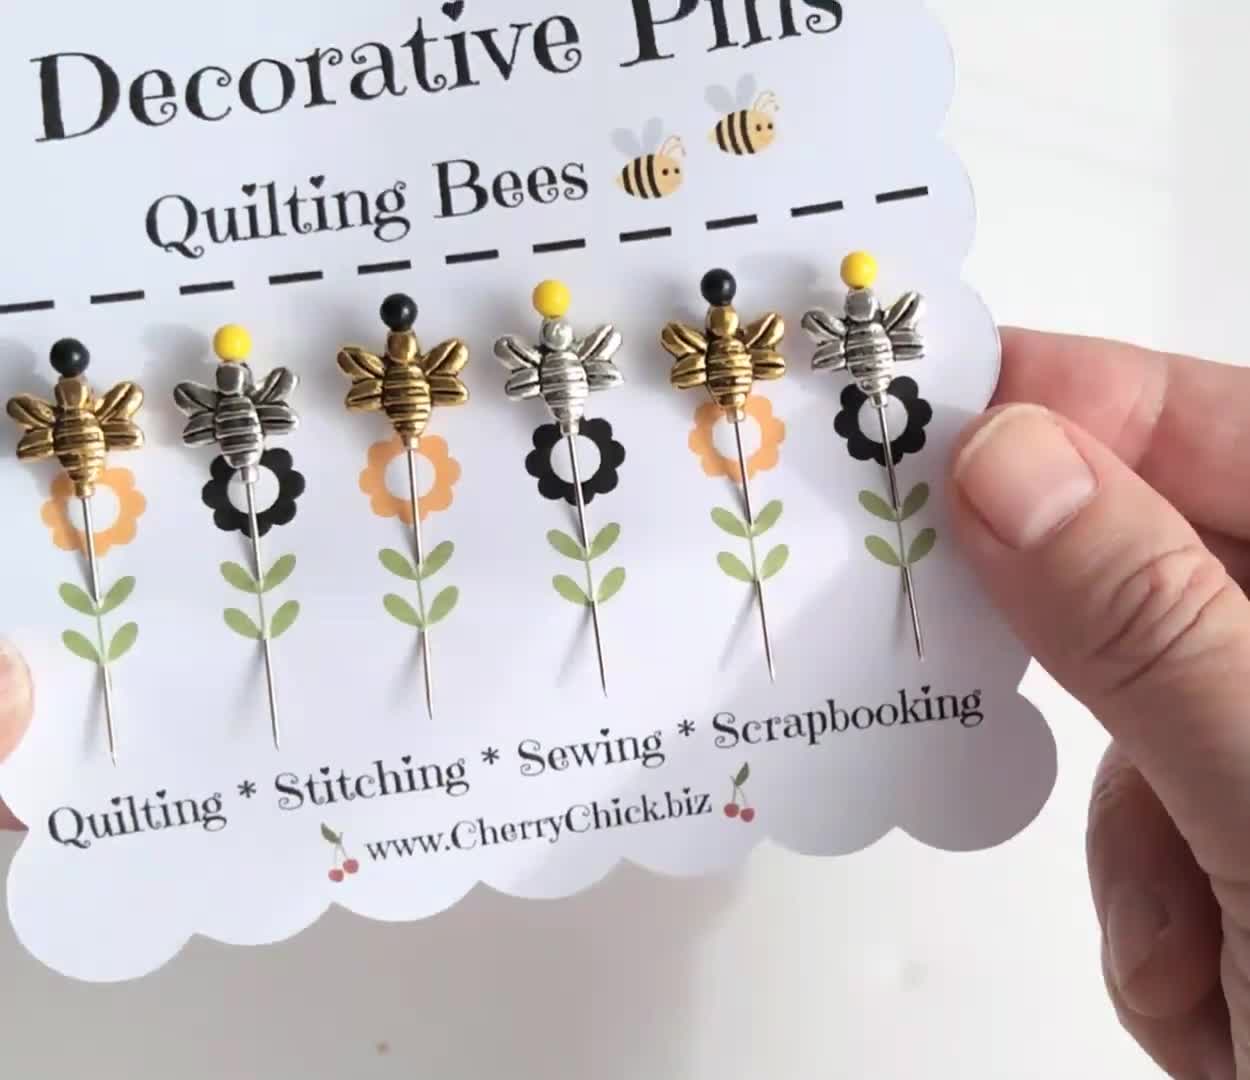 Buy Decorative Bee Pins Decorative Sewing Pins Bee Pins Quilting